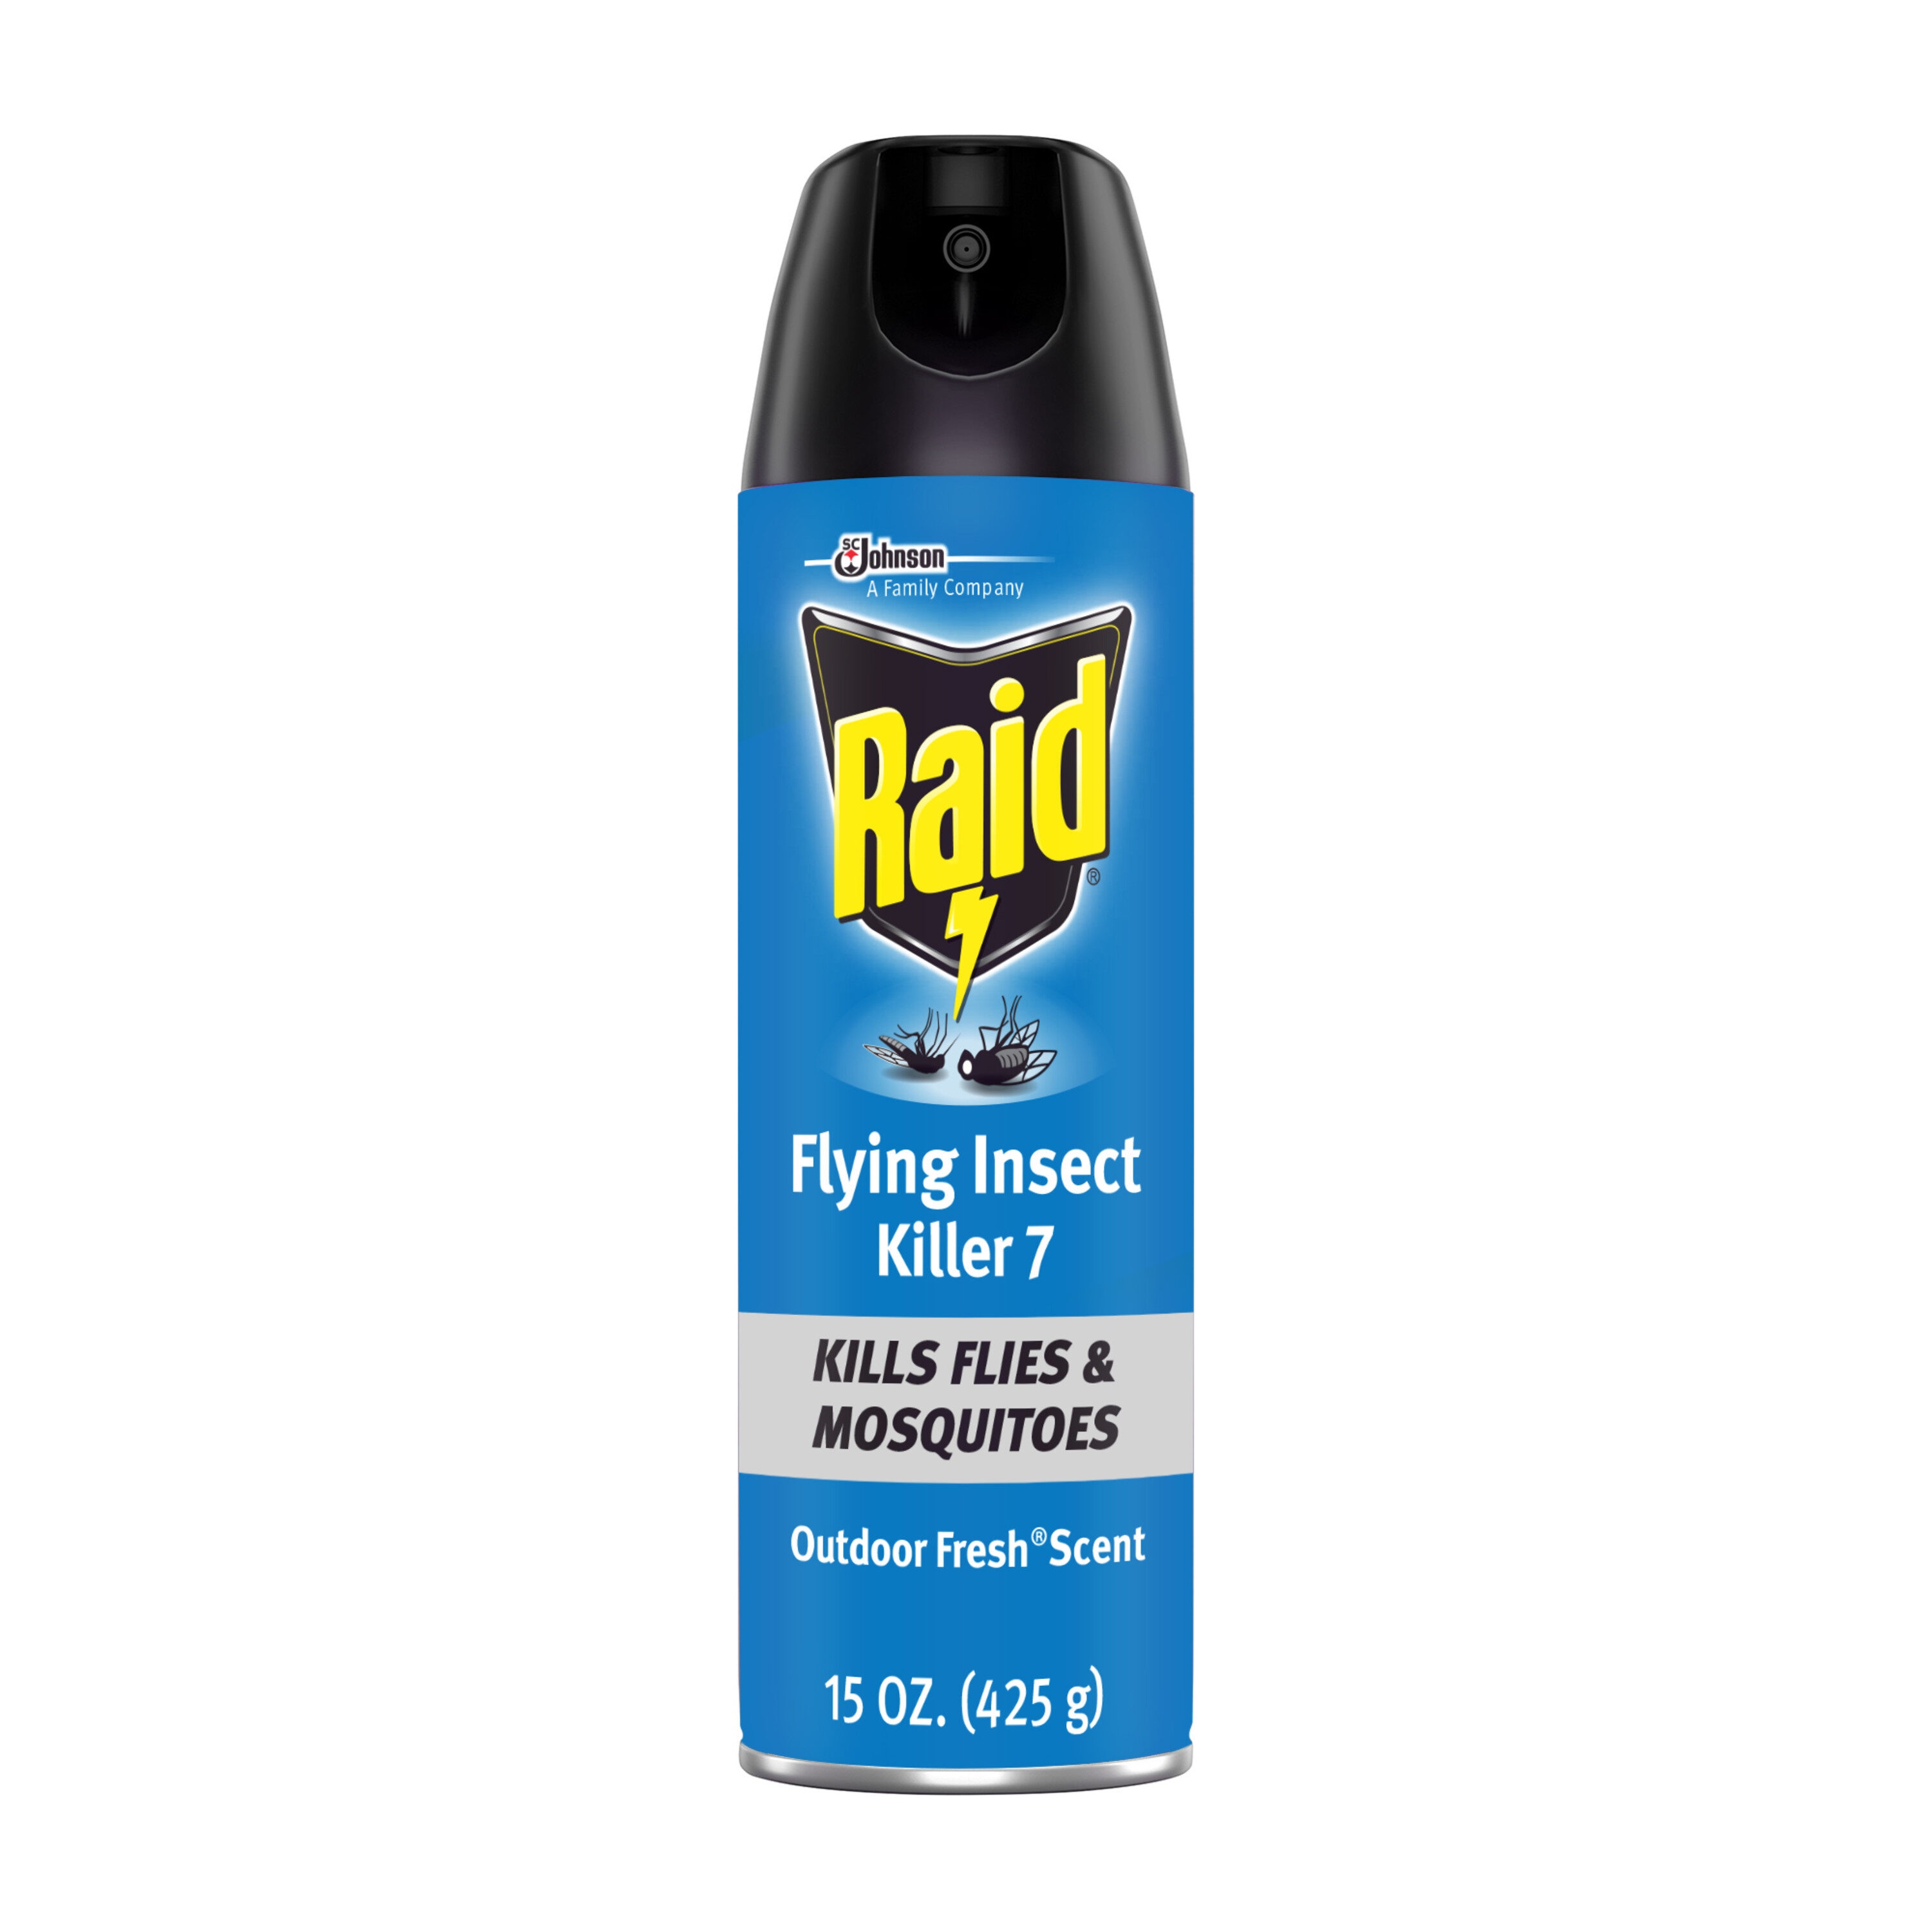 Raid Flying Insect Home and Perimeter Indoor/Outdoor Bug Spray in